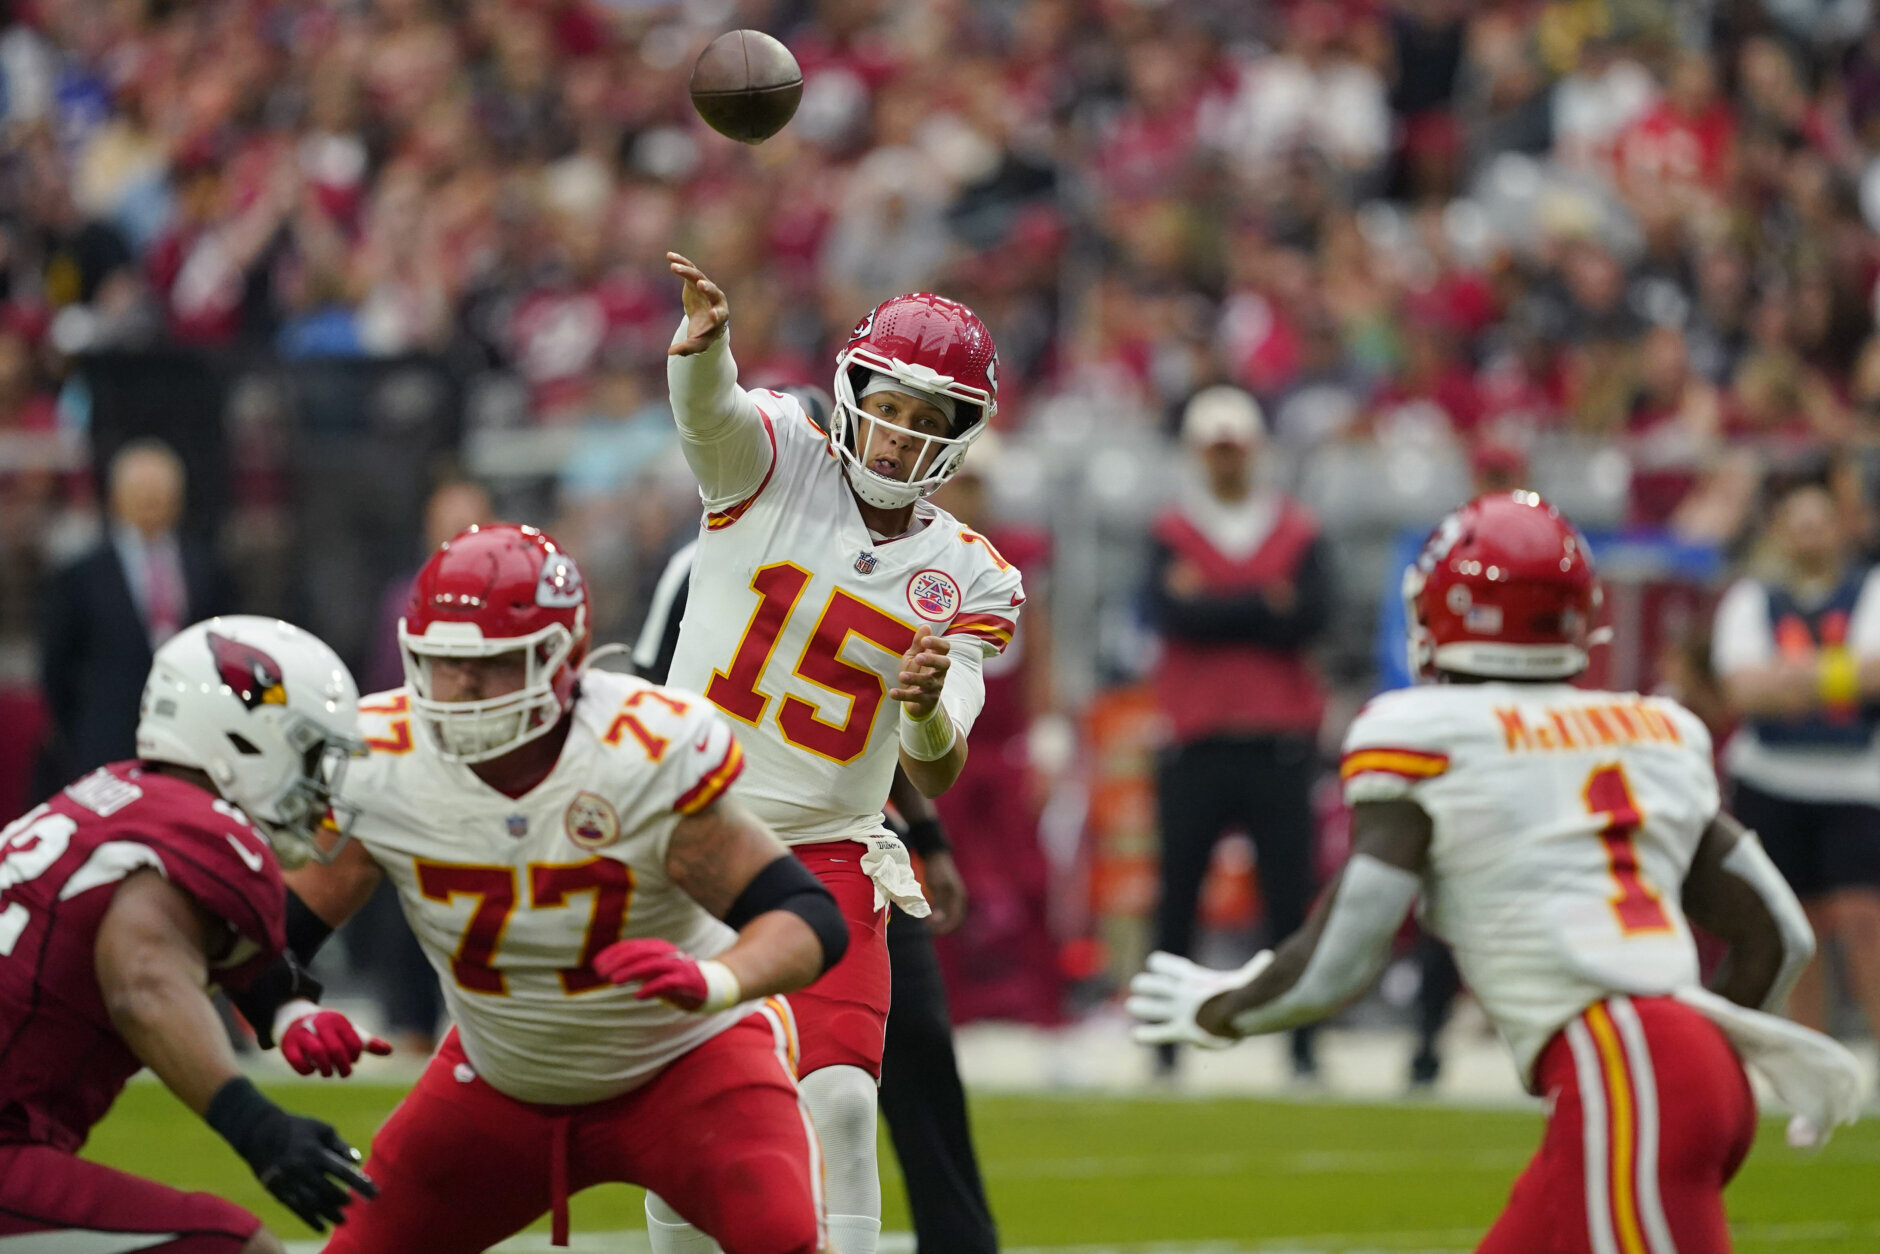 <p><b><i>Chiefs 44</i></b><br />
<b><i>Cardinals 21</i></b></p>
<p>Sure things in life: Death, taxes and Patrick Mahomes ballin&#8217; out of his mind in September.</p>
<p>Also a sure thing: Kliff Kingsbury is getting fired. <a href="https://twitter.com/joshweinfuss/status/1569134101206298625" target="_blank" rel="noopener">This comment</a> might have just ensured it&#8217;ll happen in-season.</p>
